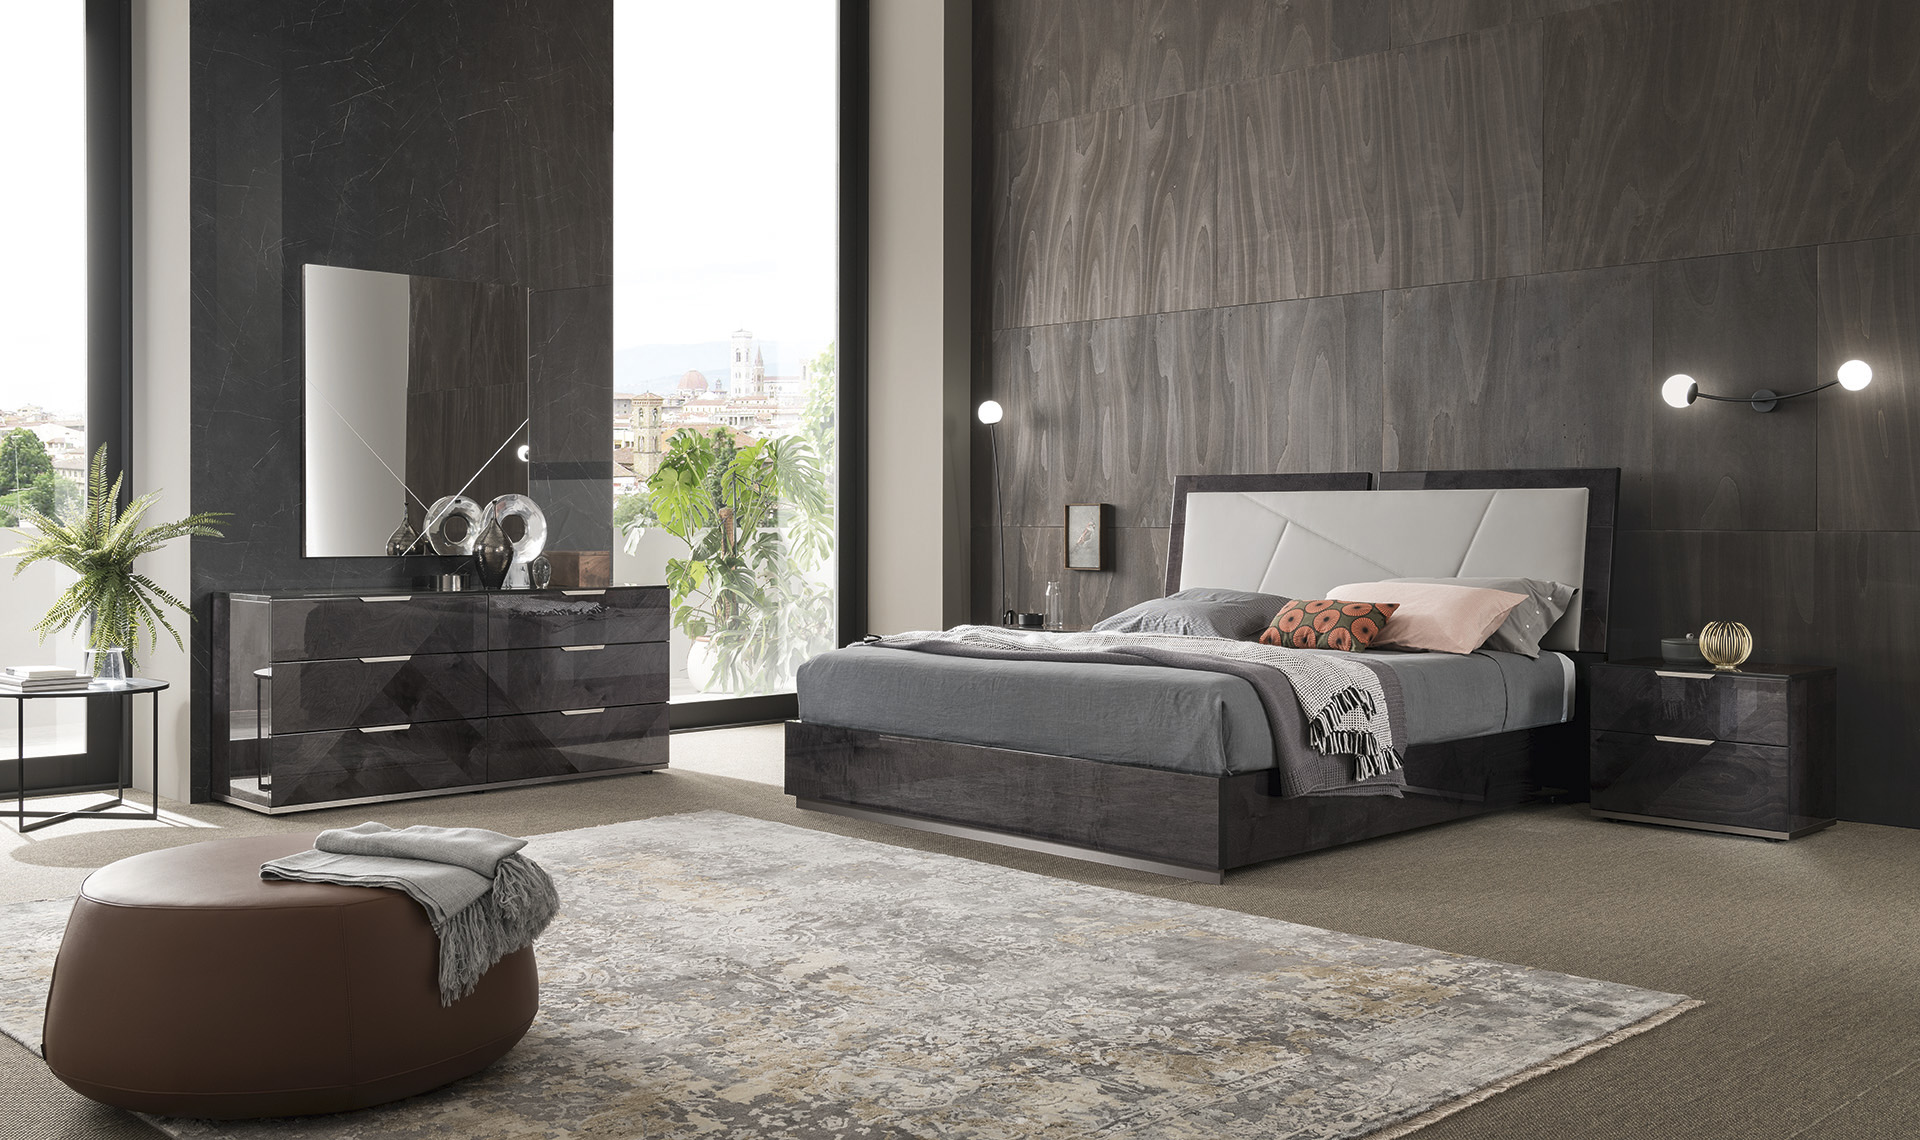 Made in Italy
BED-10